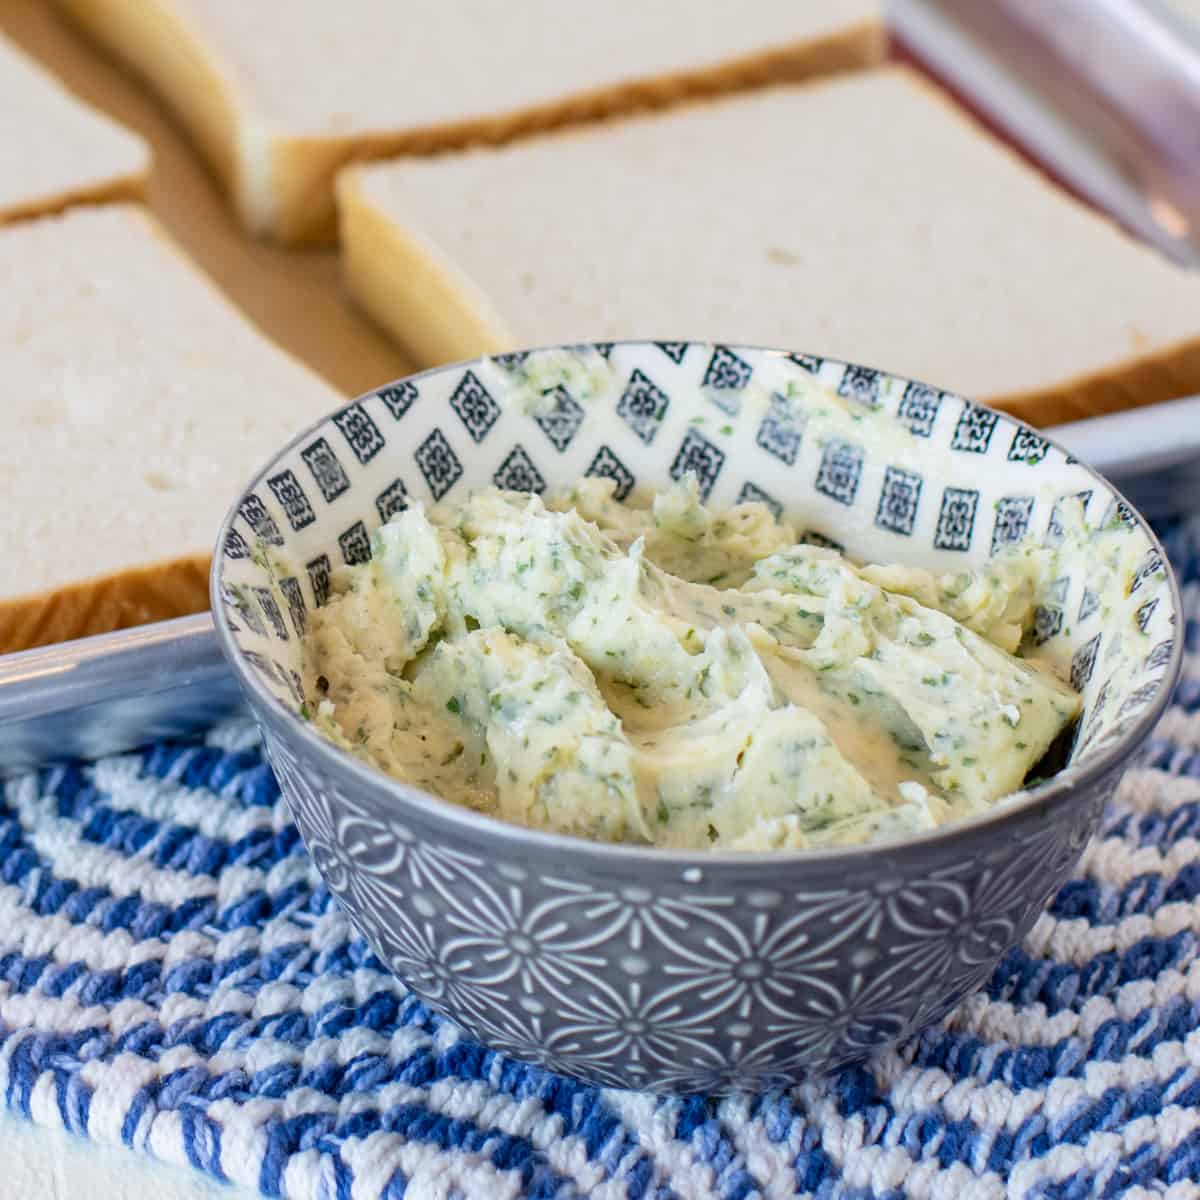 A bowl of homemade garlic butter in front of bread slices.